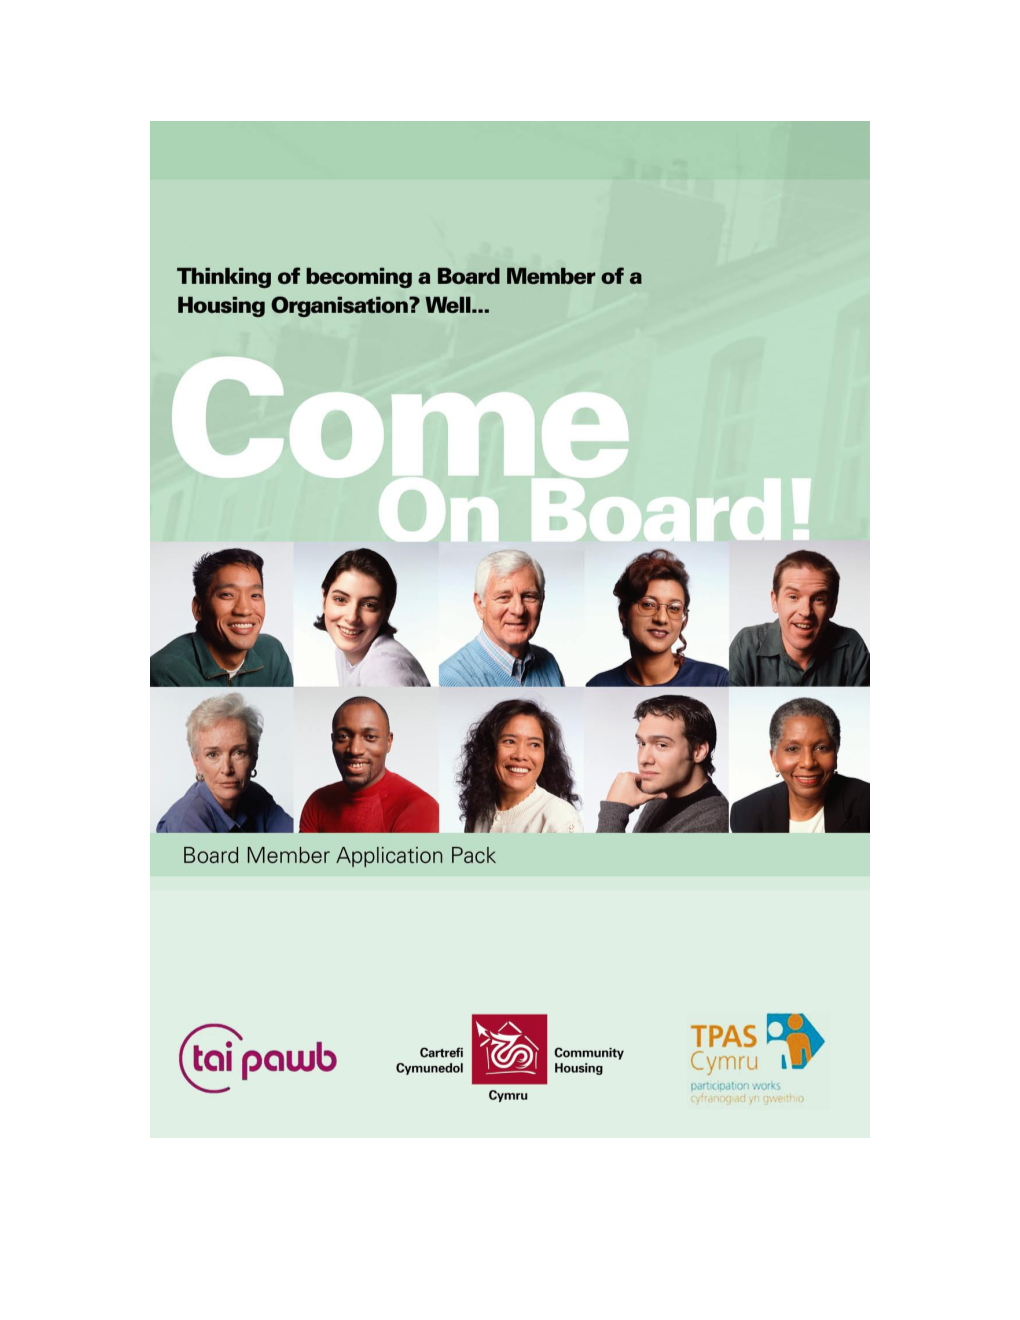 Welcome to Come on Board!